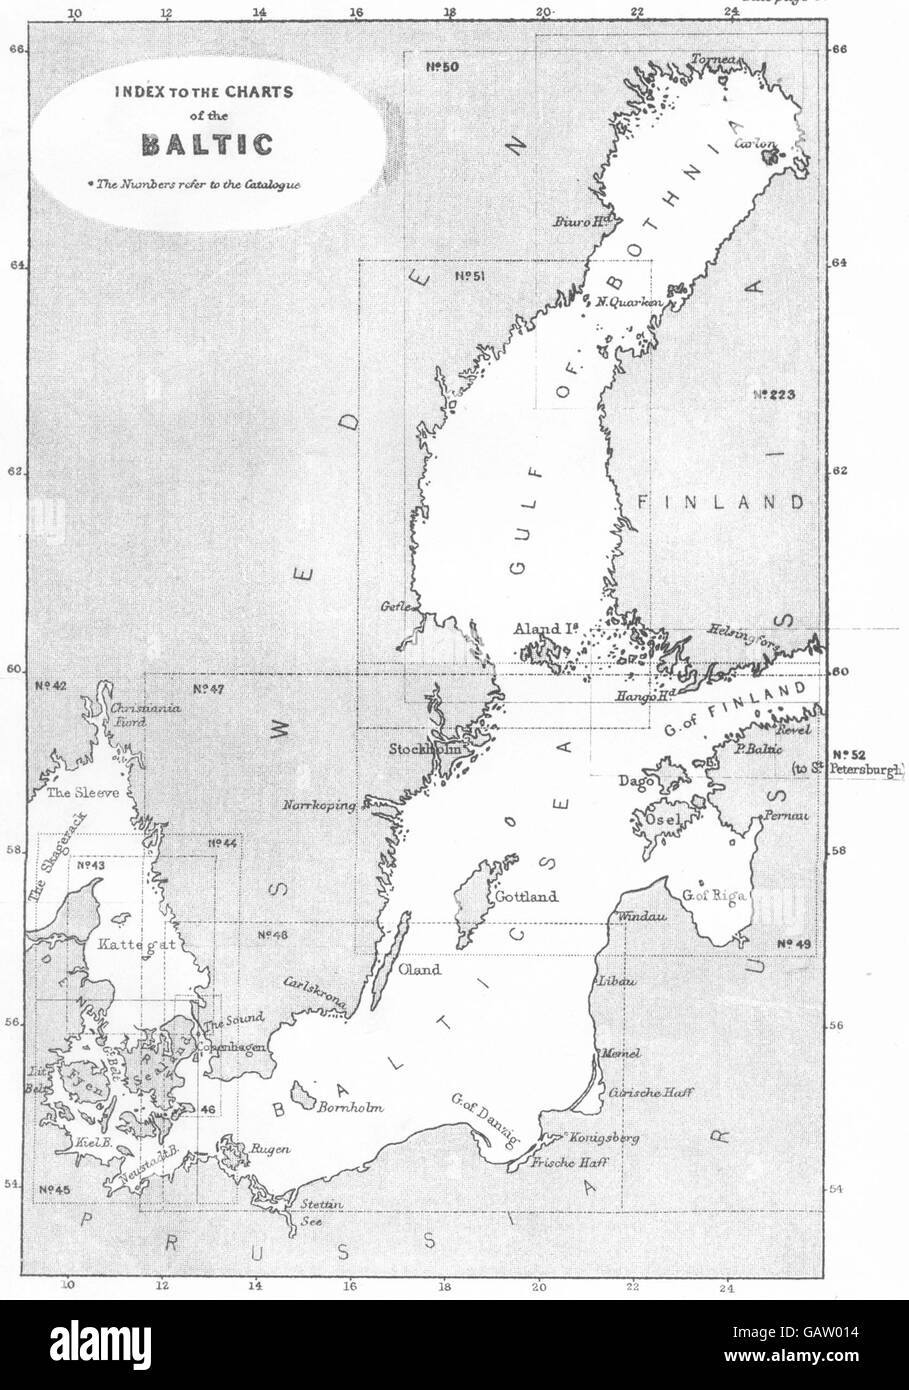 MAPS: Index to the Charts of the Baltic, 1881 Stock Photo